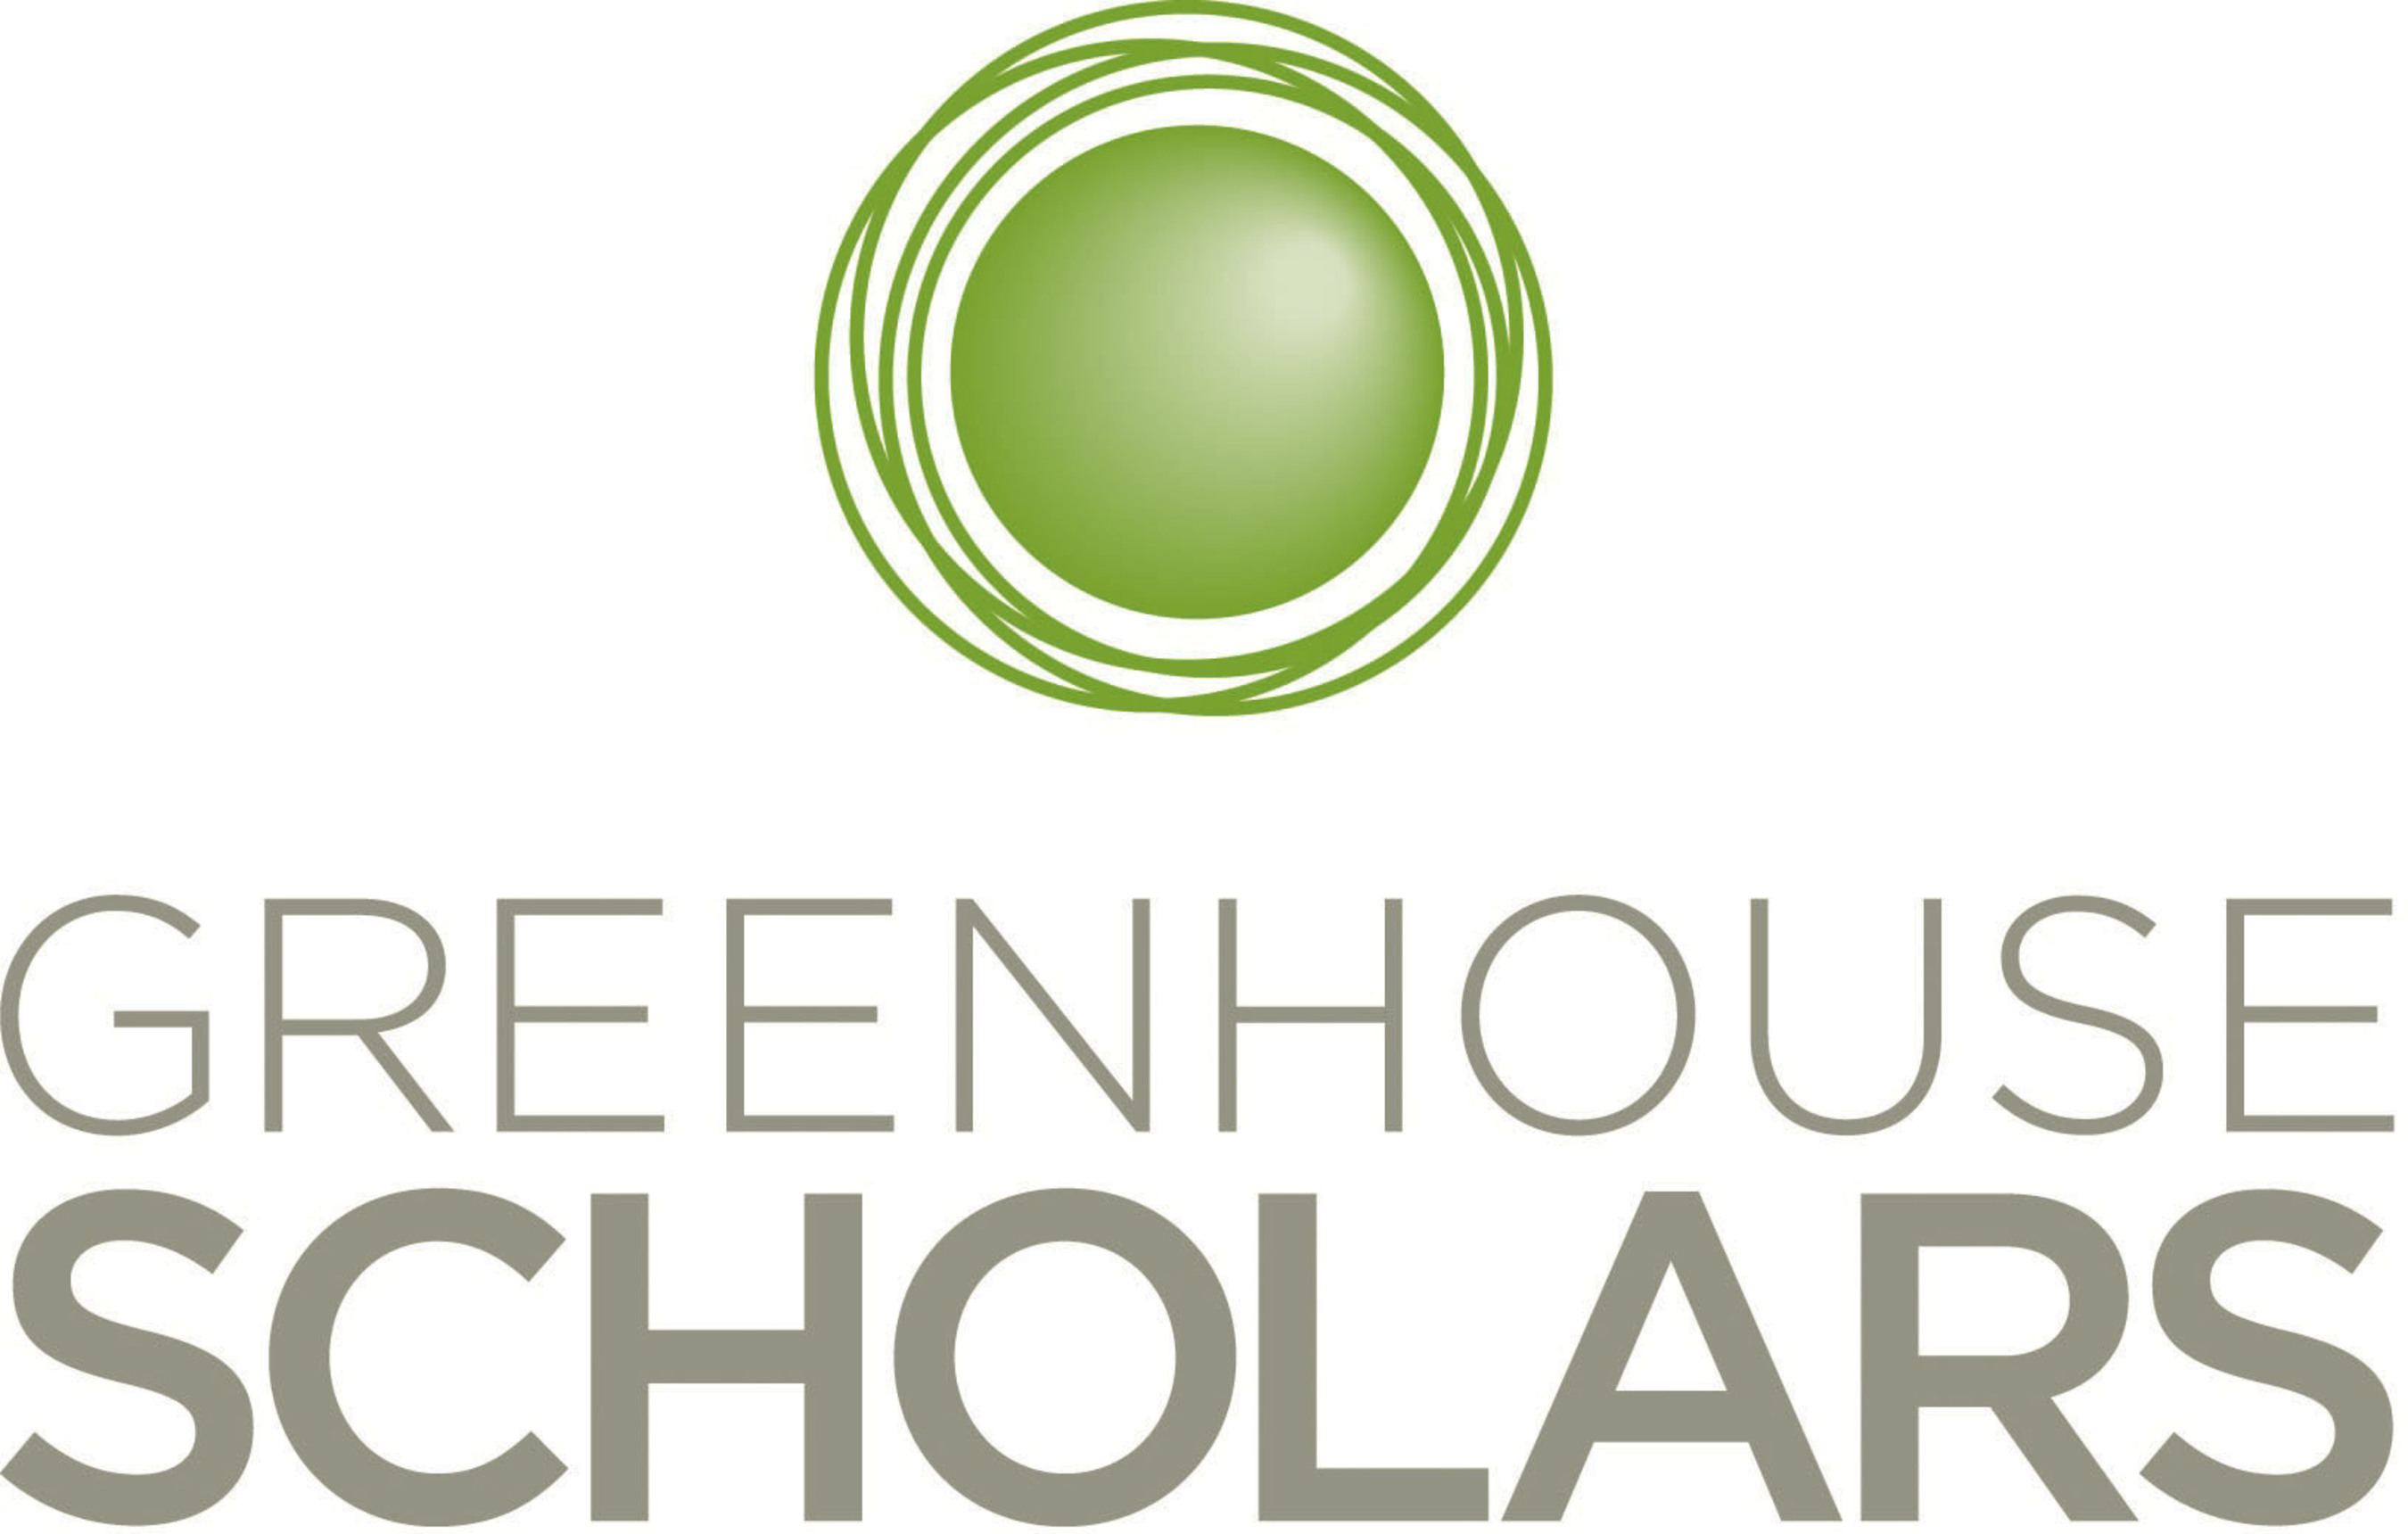 Greenhouse Scholars is a non-profit organization based in Boulder, Colorado providing comprehensive support for high-performing and under-resourced students from Colorado and Illinois. (PRNewsFoto/Greenhouse Scholars) (PRNewsFoto/GREENHOUSE SCHOLARS)